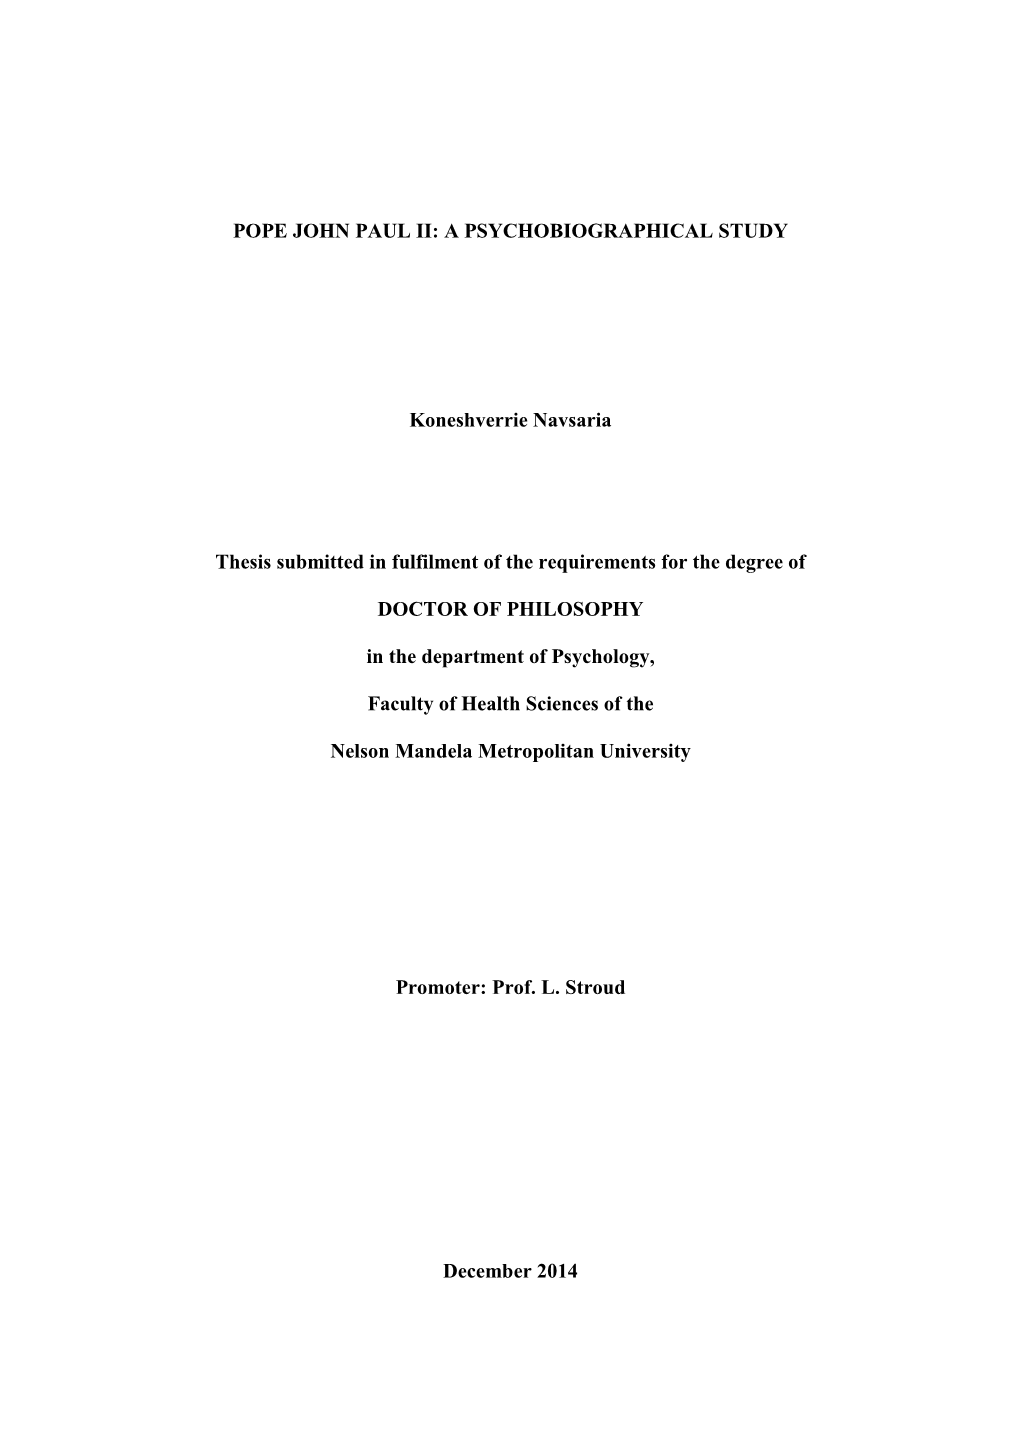 POPE JOHN PAUL II: a PSYCHOBIOGRAPHICAL STUDY Koneshverrie Navsaria Thesis Submitted in Fulfilment of the Requirements for the D